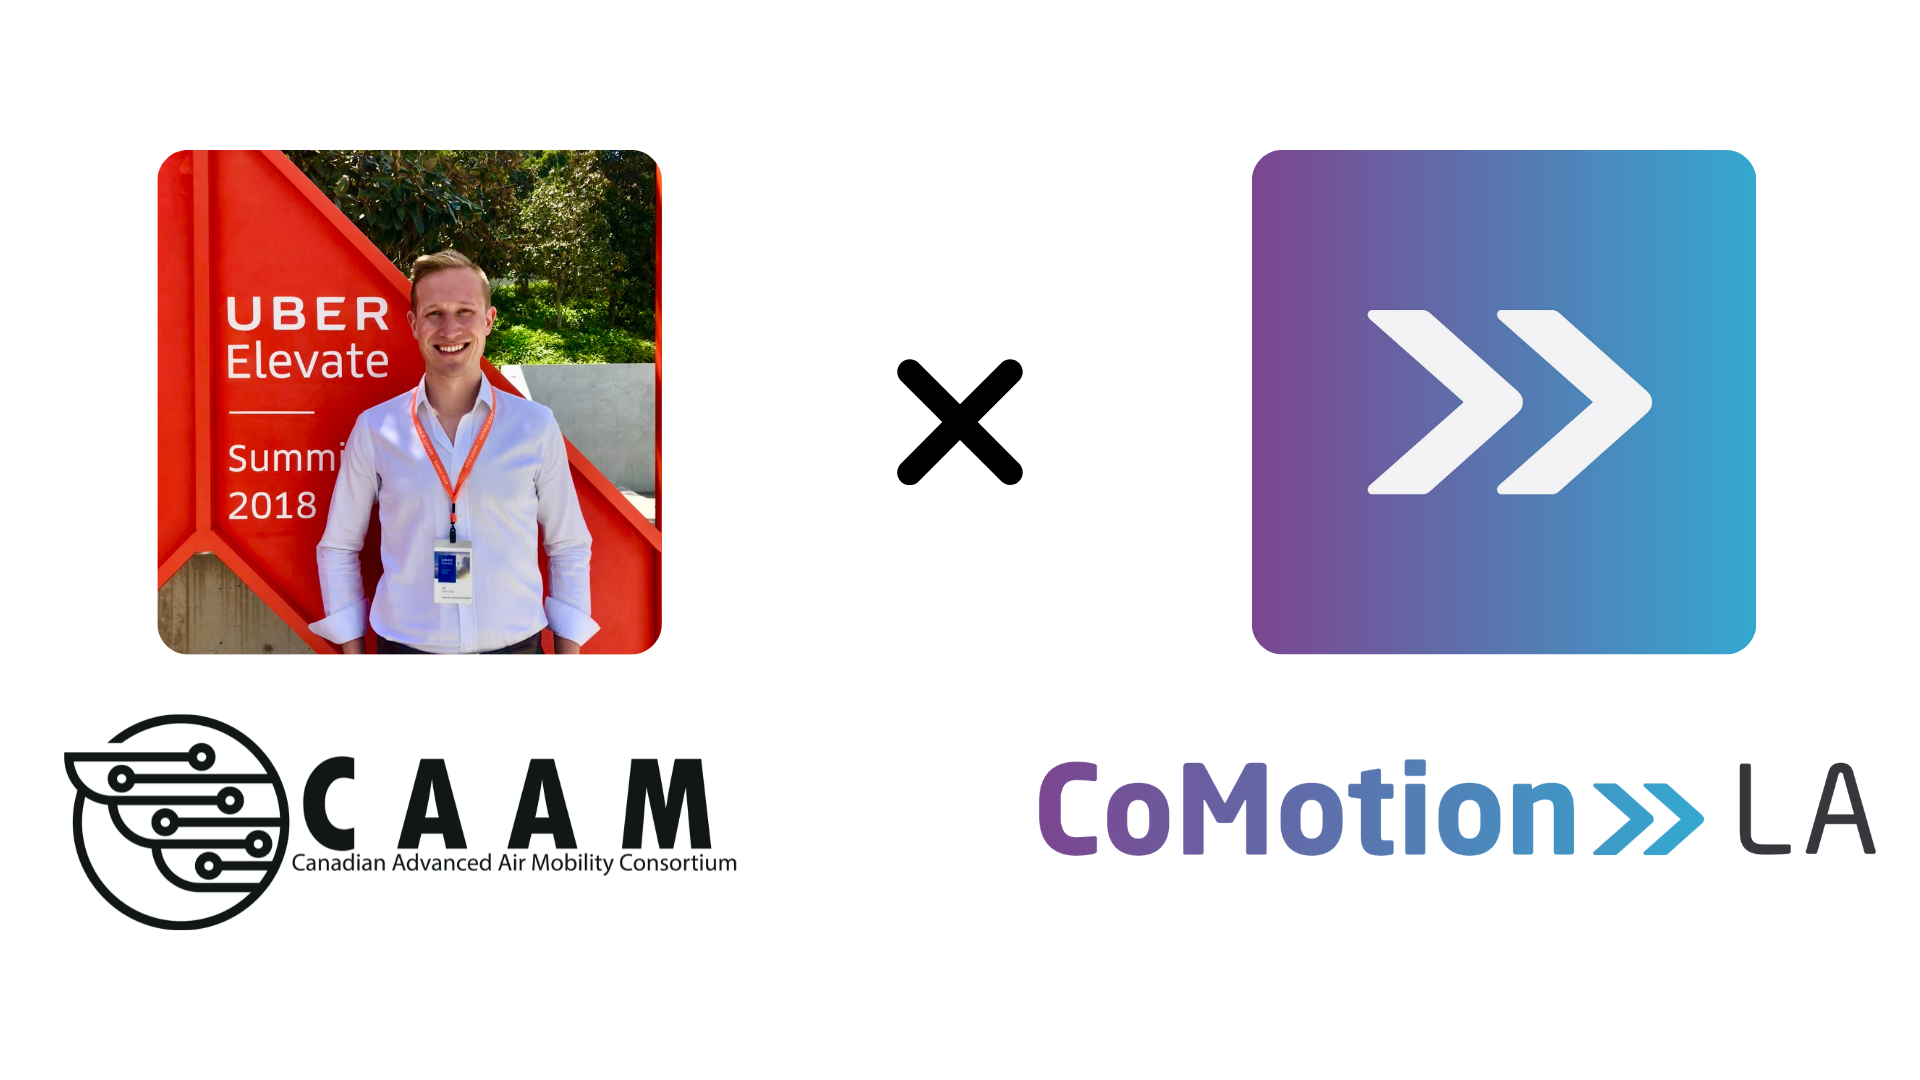 CAAM and CoMotion